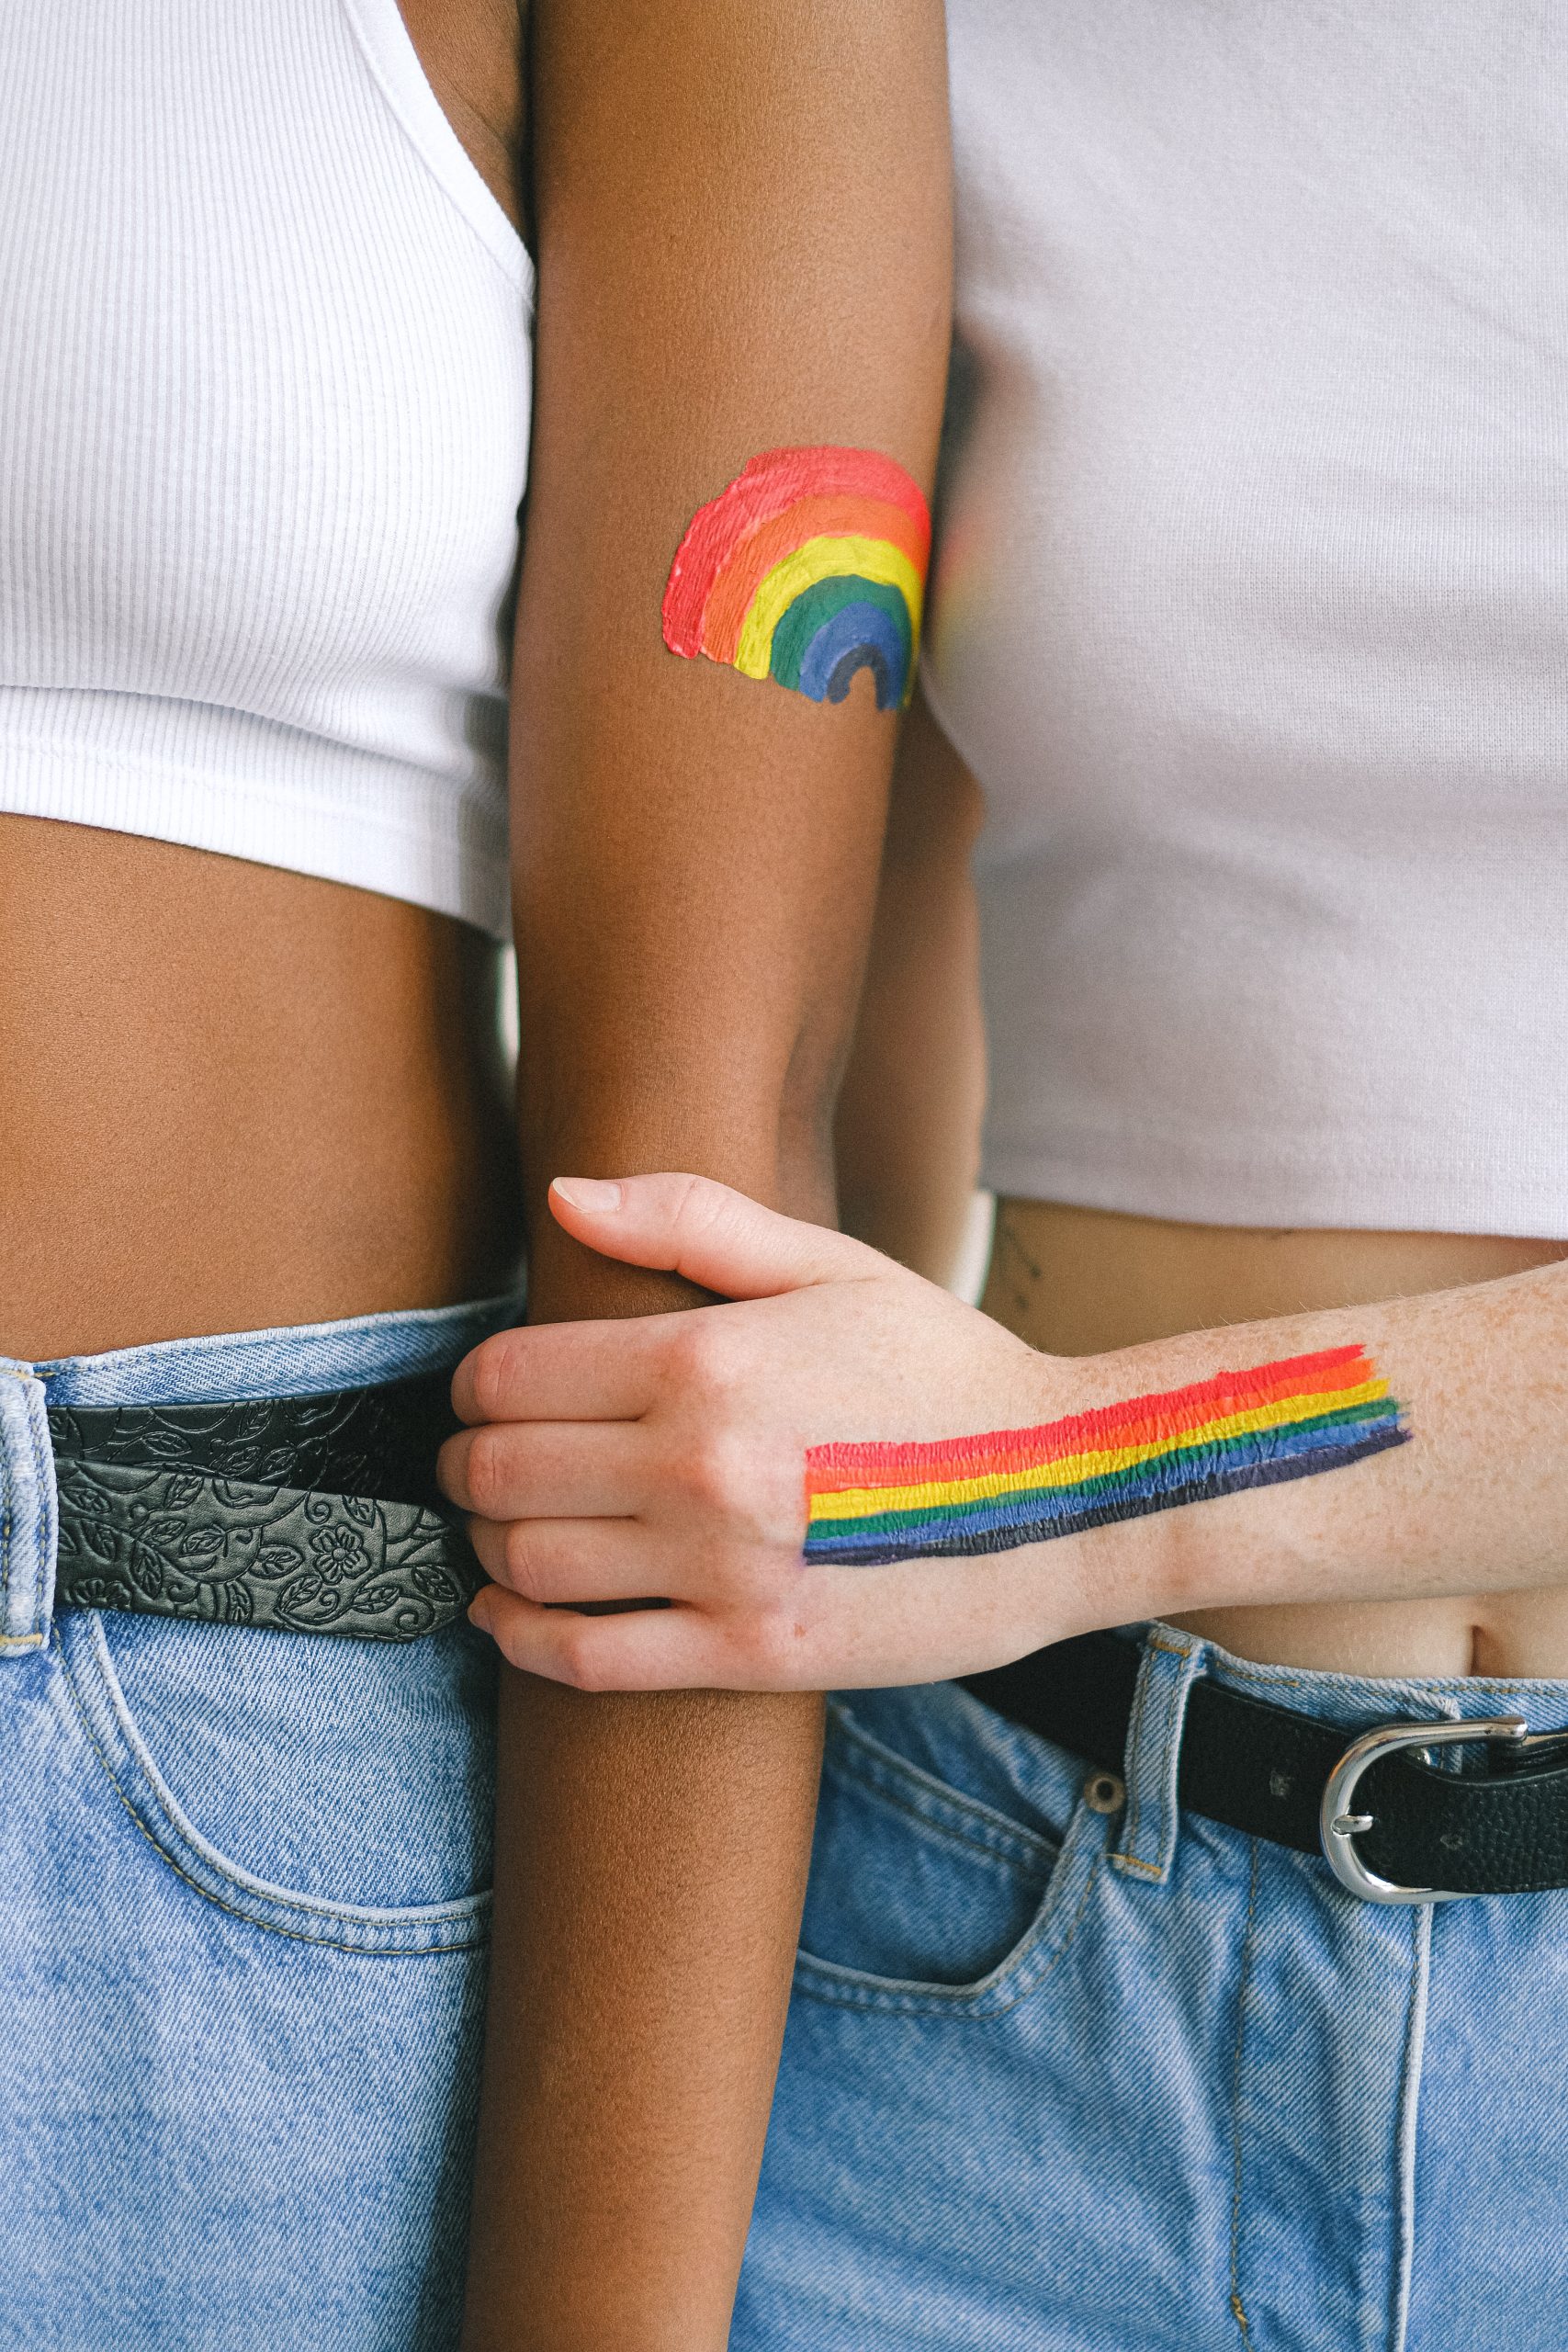 An individual holding another person's arm. Each has a colorful painting on their left arm. One has a rainbow.